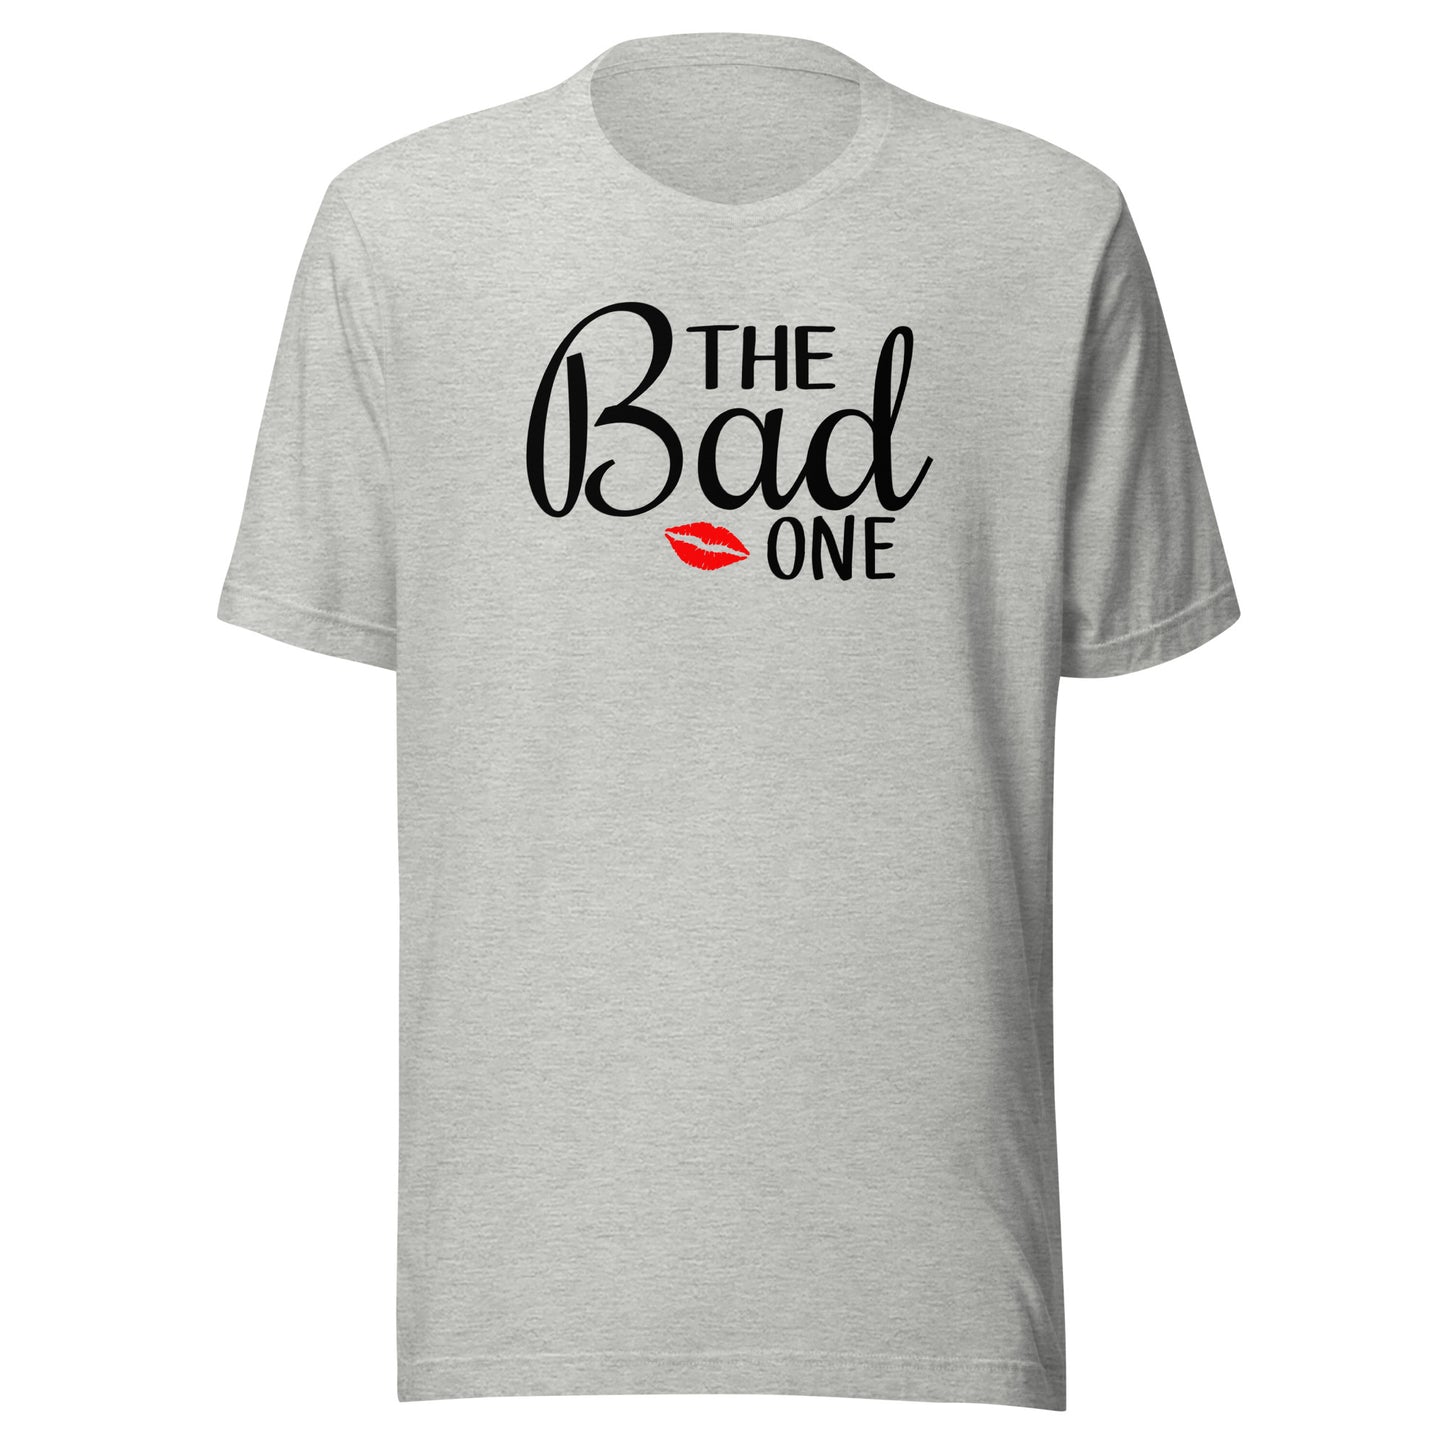 Large - XL The Bad One (black letters)